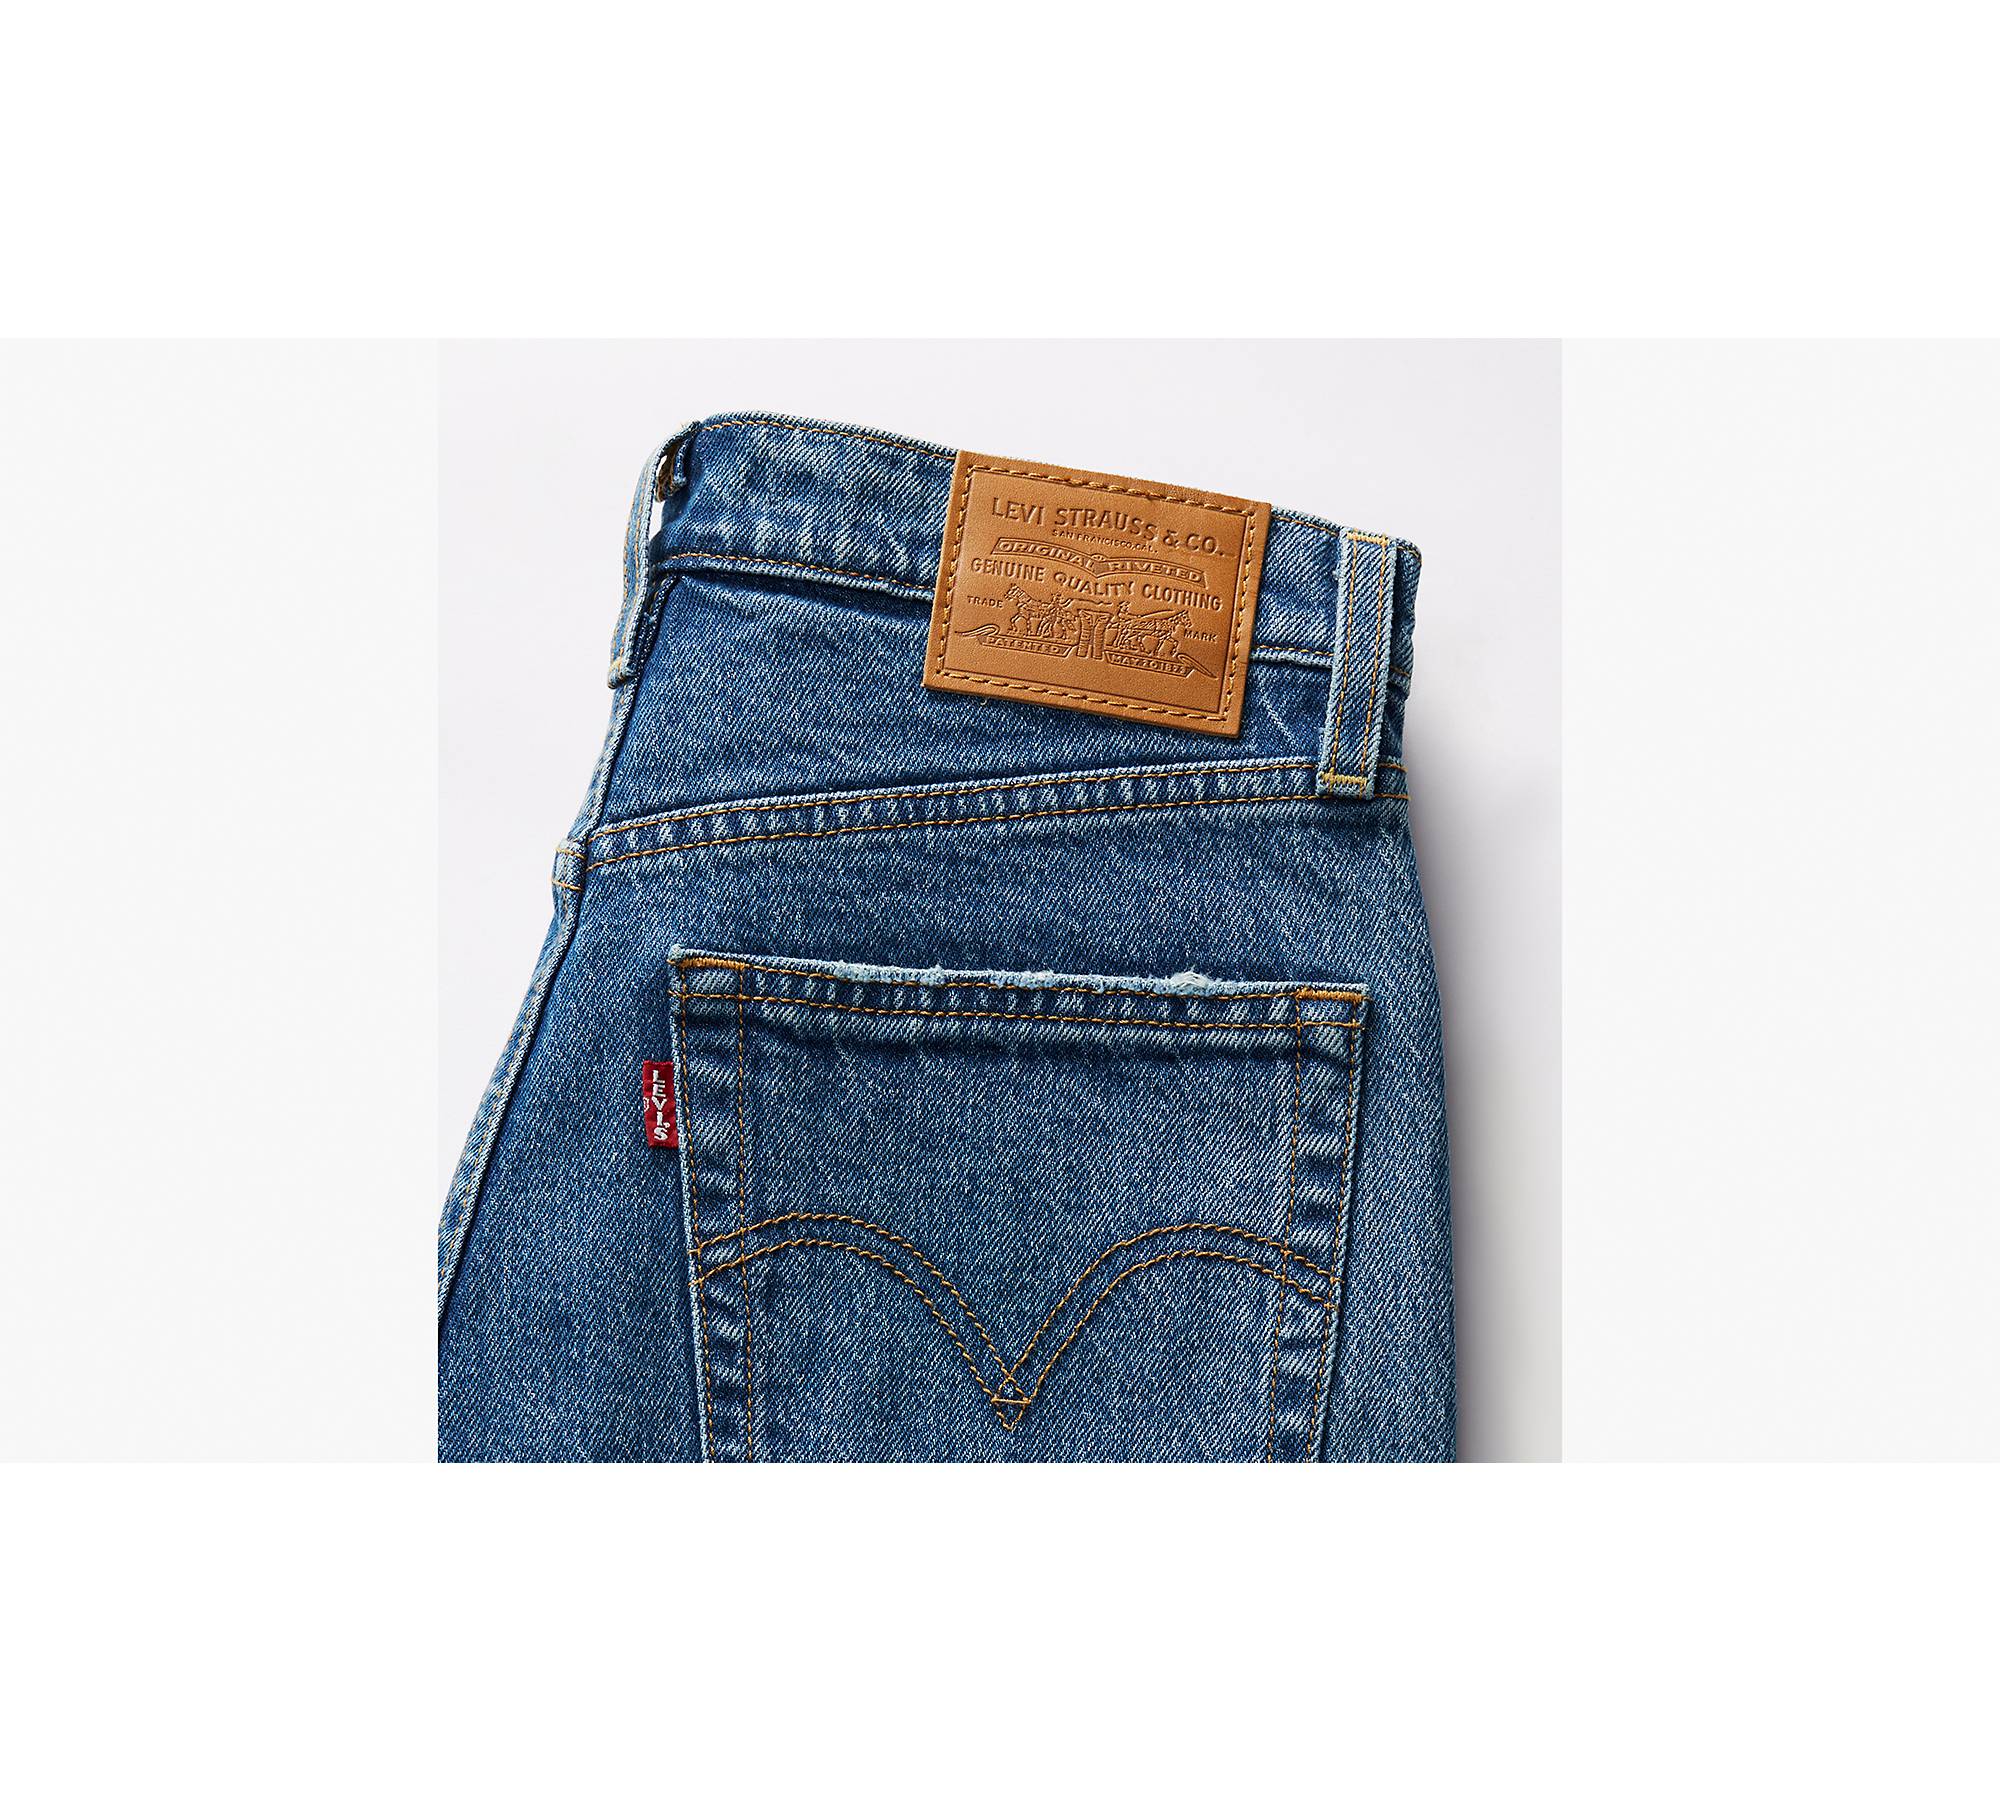 Levis Ribcage straight ankle jeans - Size 26 X 29 Brand New Retail $149